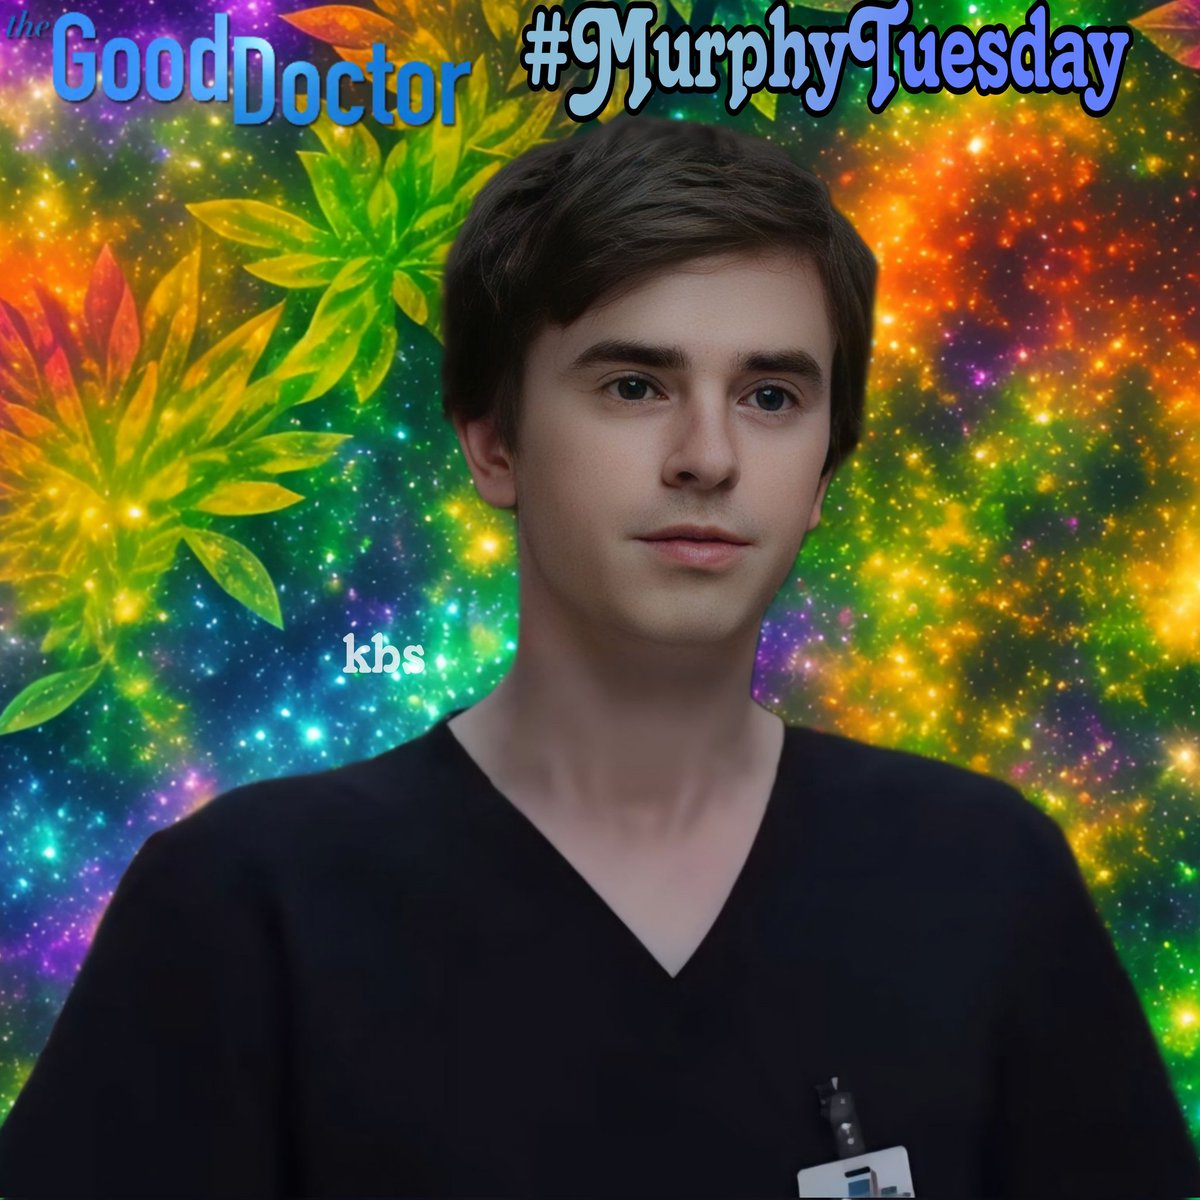 Tonight's episode 708 'The Overview Effect' is definitely going to be an emotional one. 🥞🍏💖💙 #FreddieHighmore #DrDimples #DrShaunMurphy #TheGoodDoctor #MurphyTuesday @freddiehighmore @GoodDoctorABC @SPTV @ABCSignature